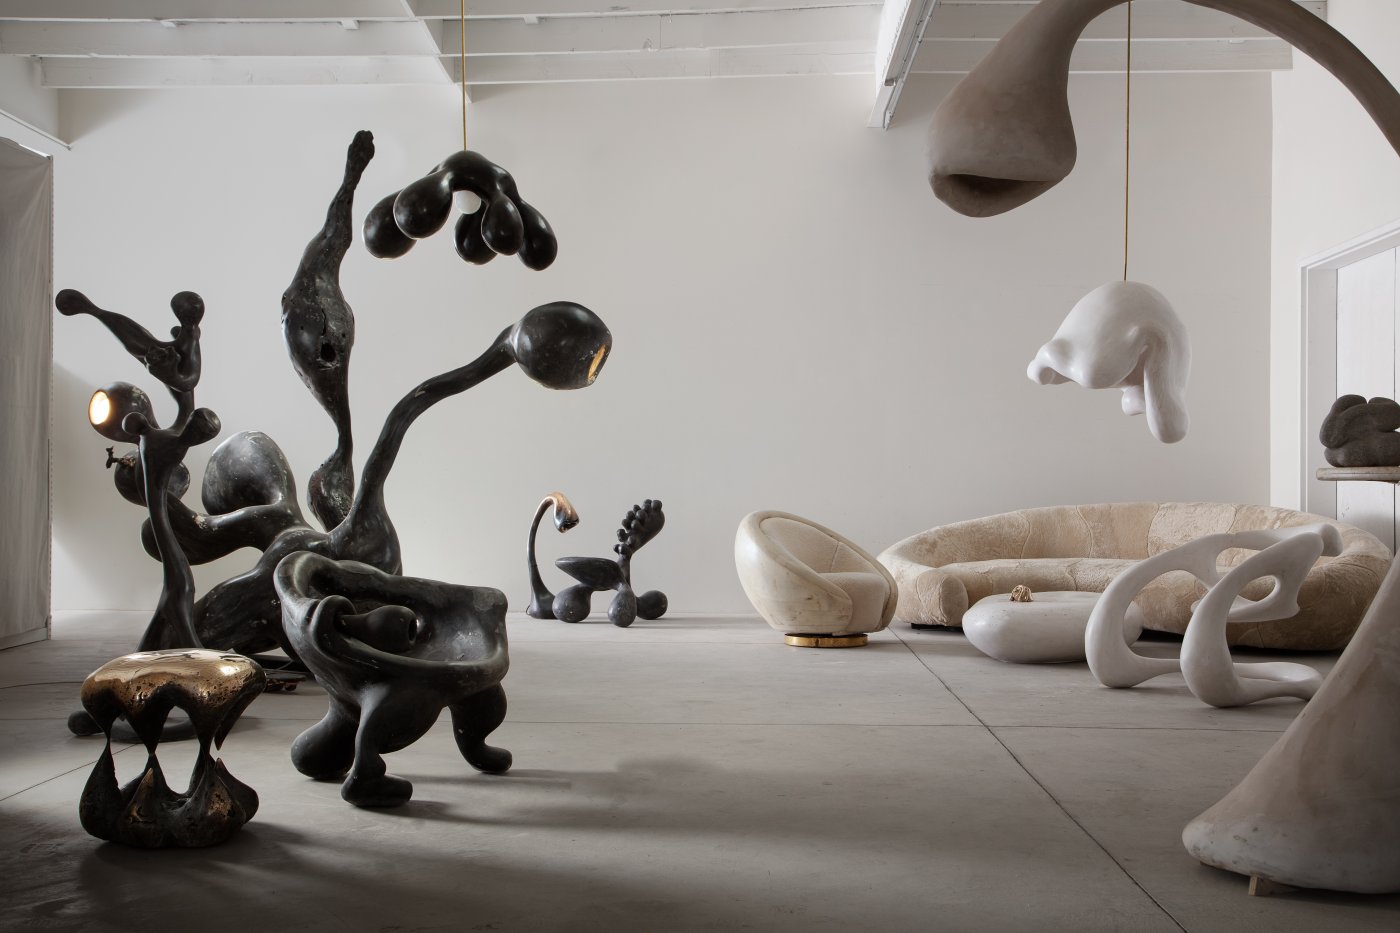 Furniture and illuminated sculptures by Rogan Gregory inside his Santa Monica, California, studio. Photo by Joe Kramm, courtesy of R & Company.